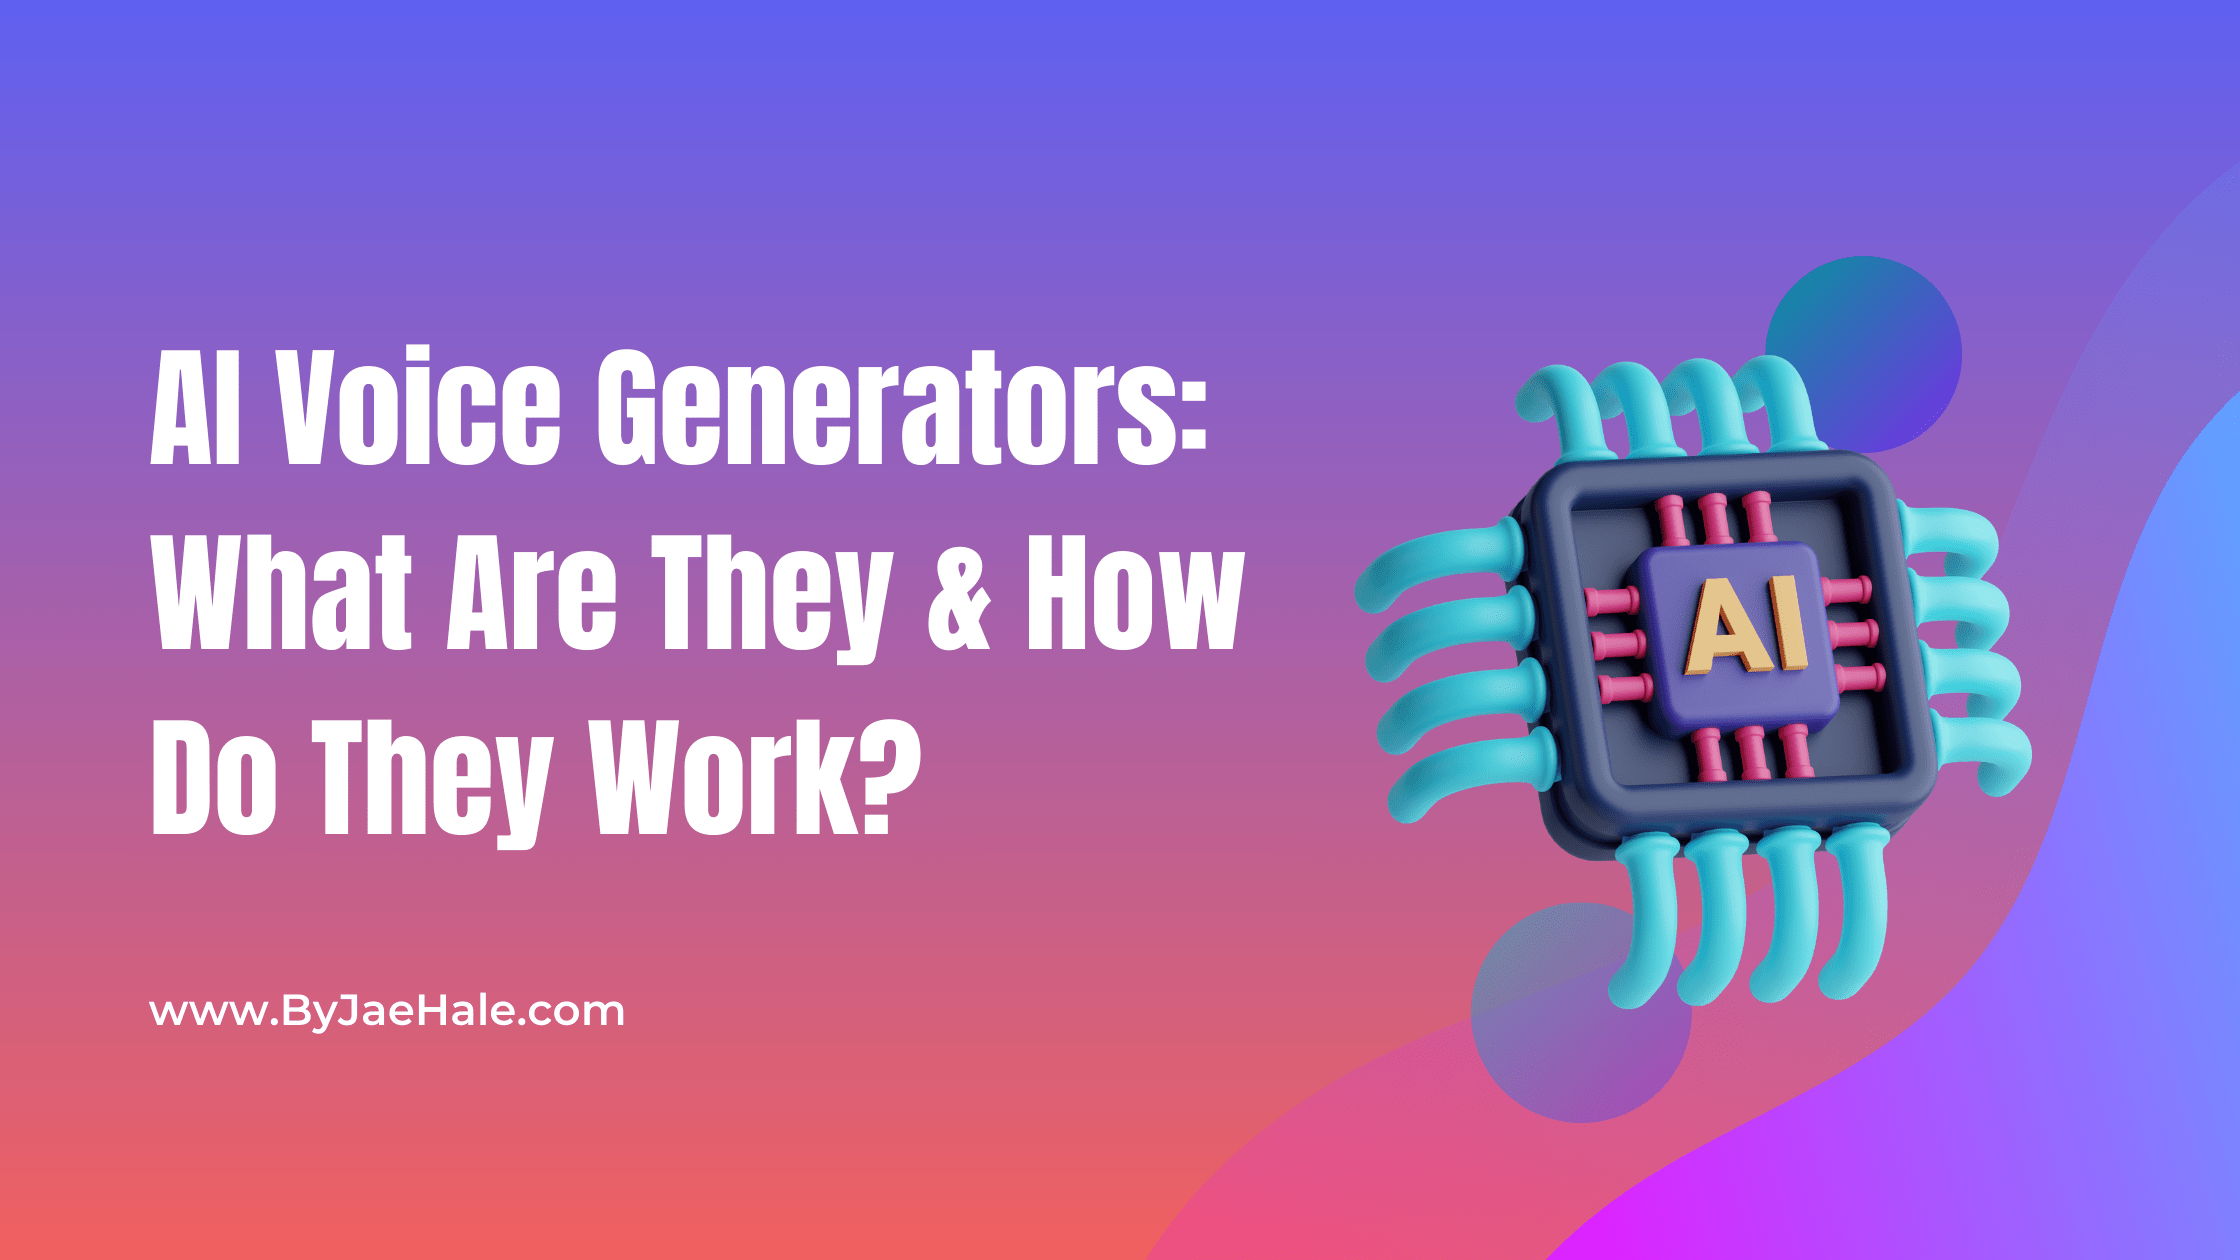 AI Voice Generators: What Are They & How Do They Work?